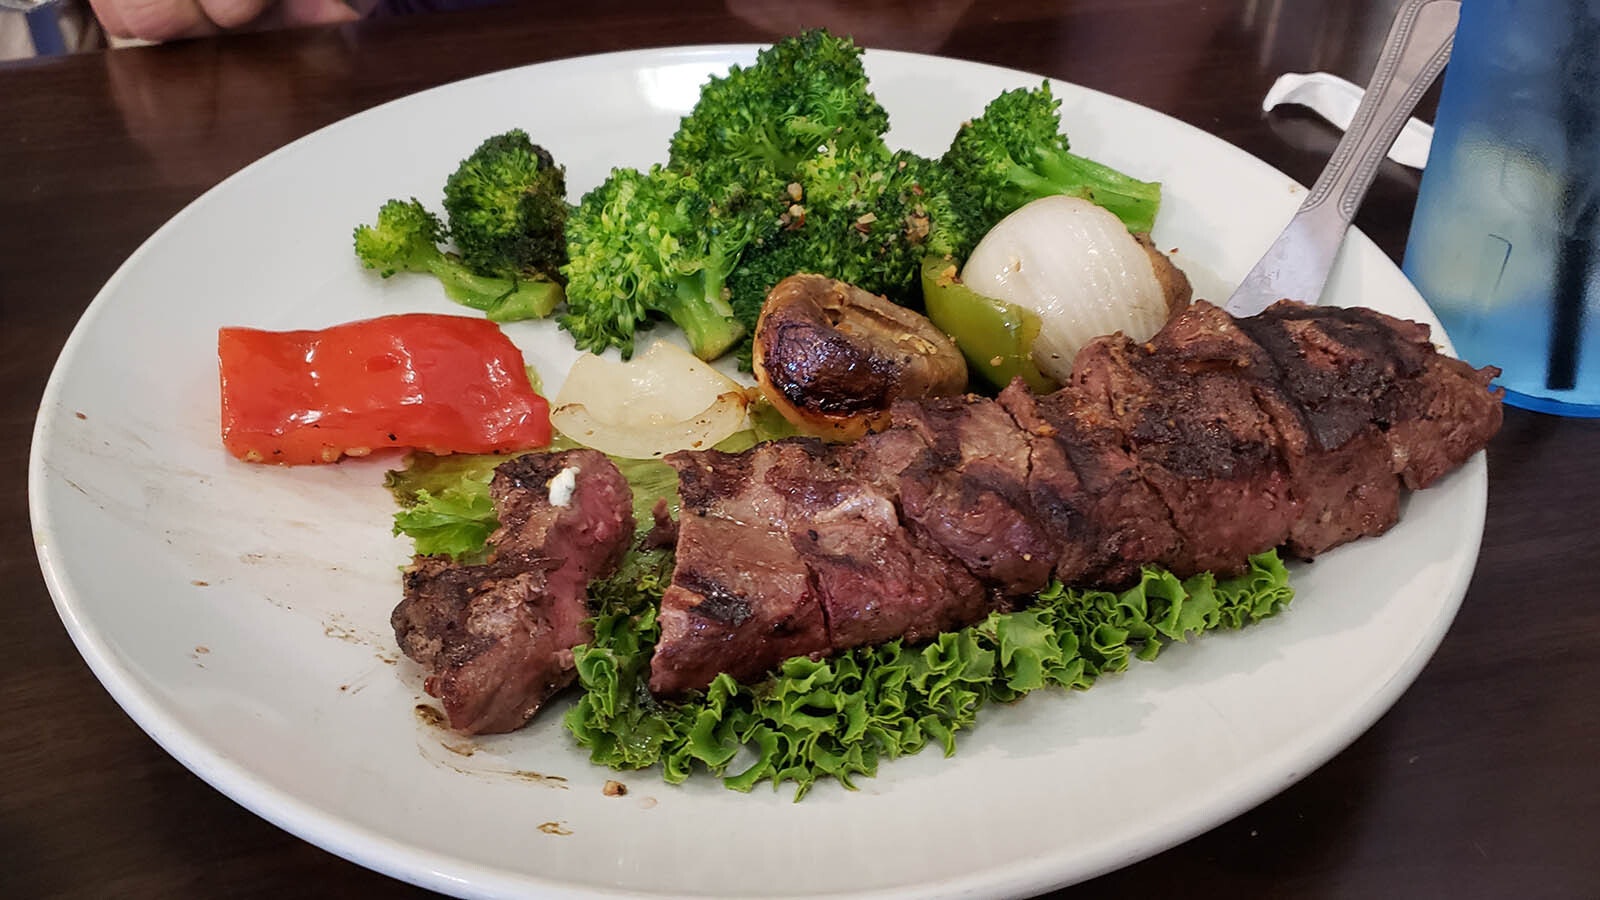 For lighter fare, try the kabobs at lunchtime, with broccoli.